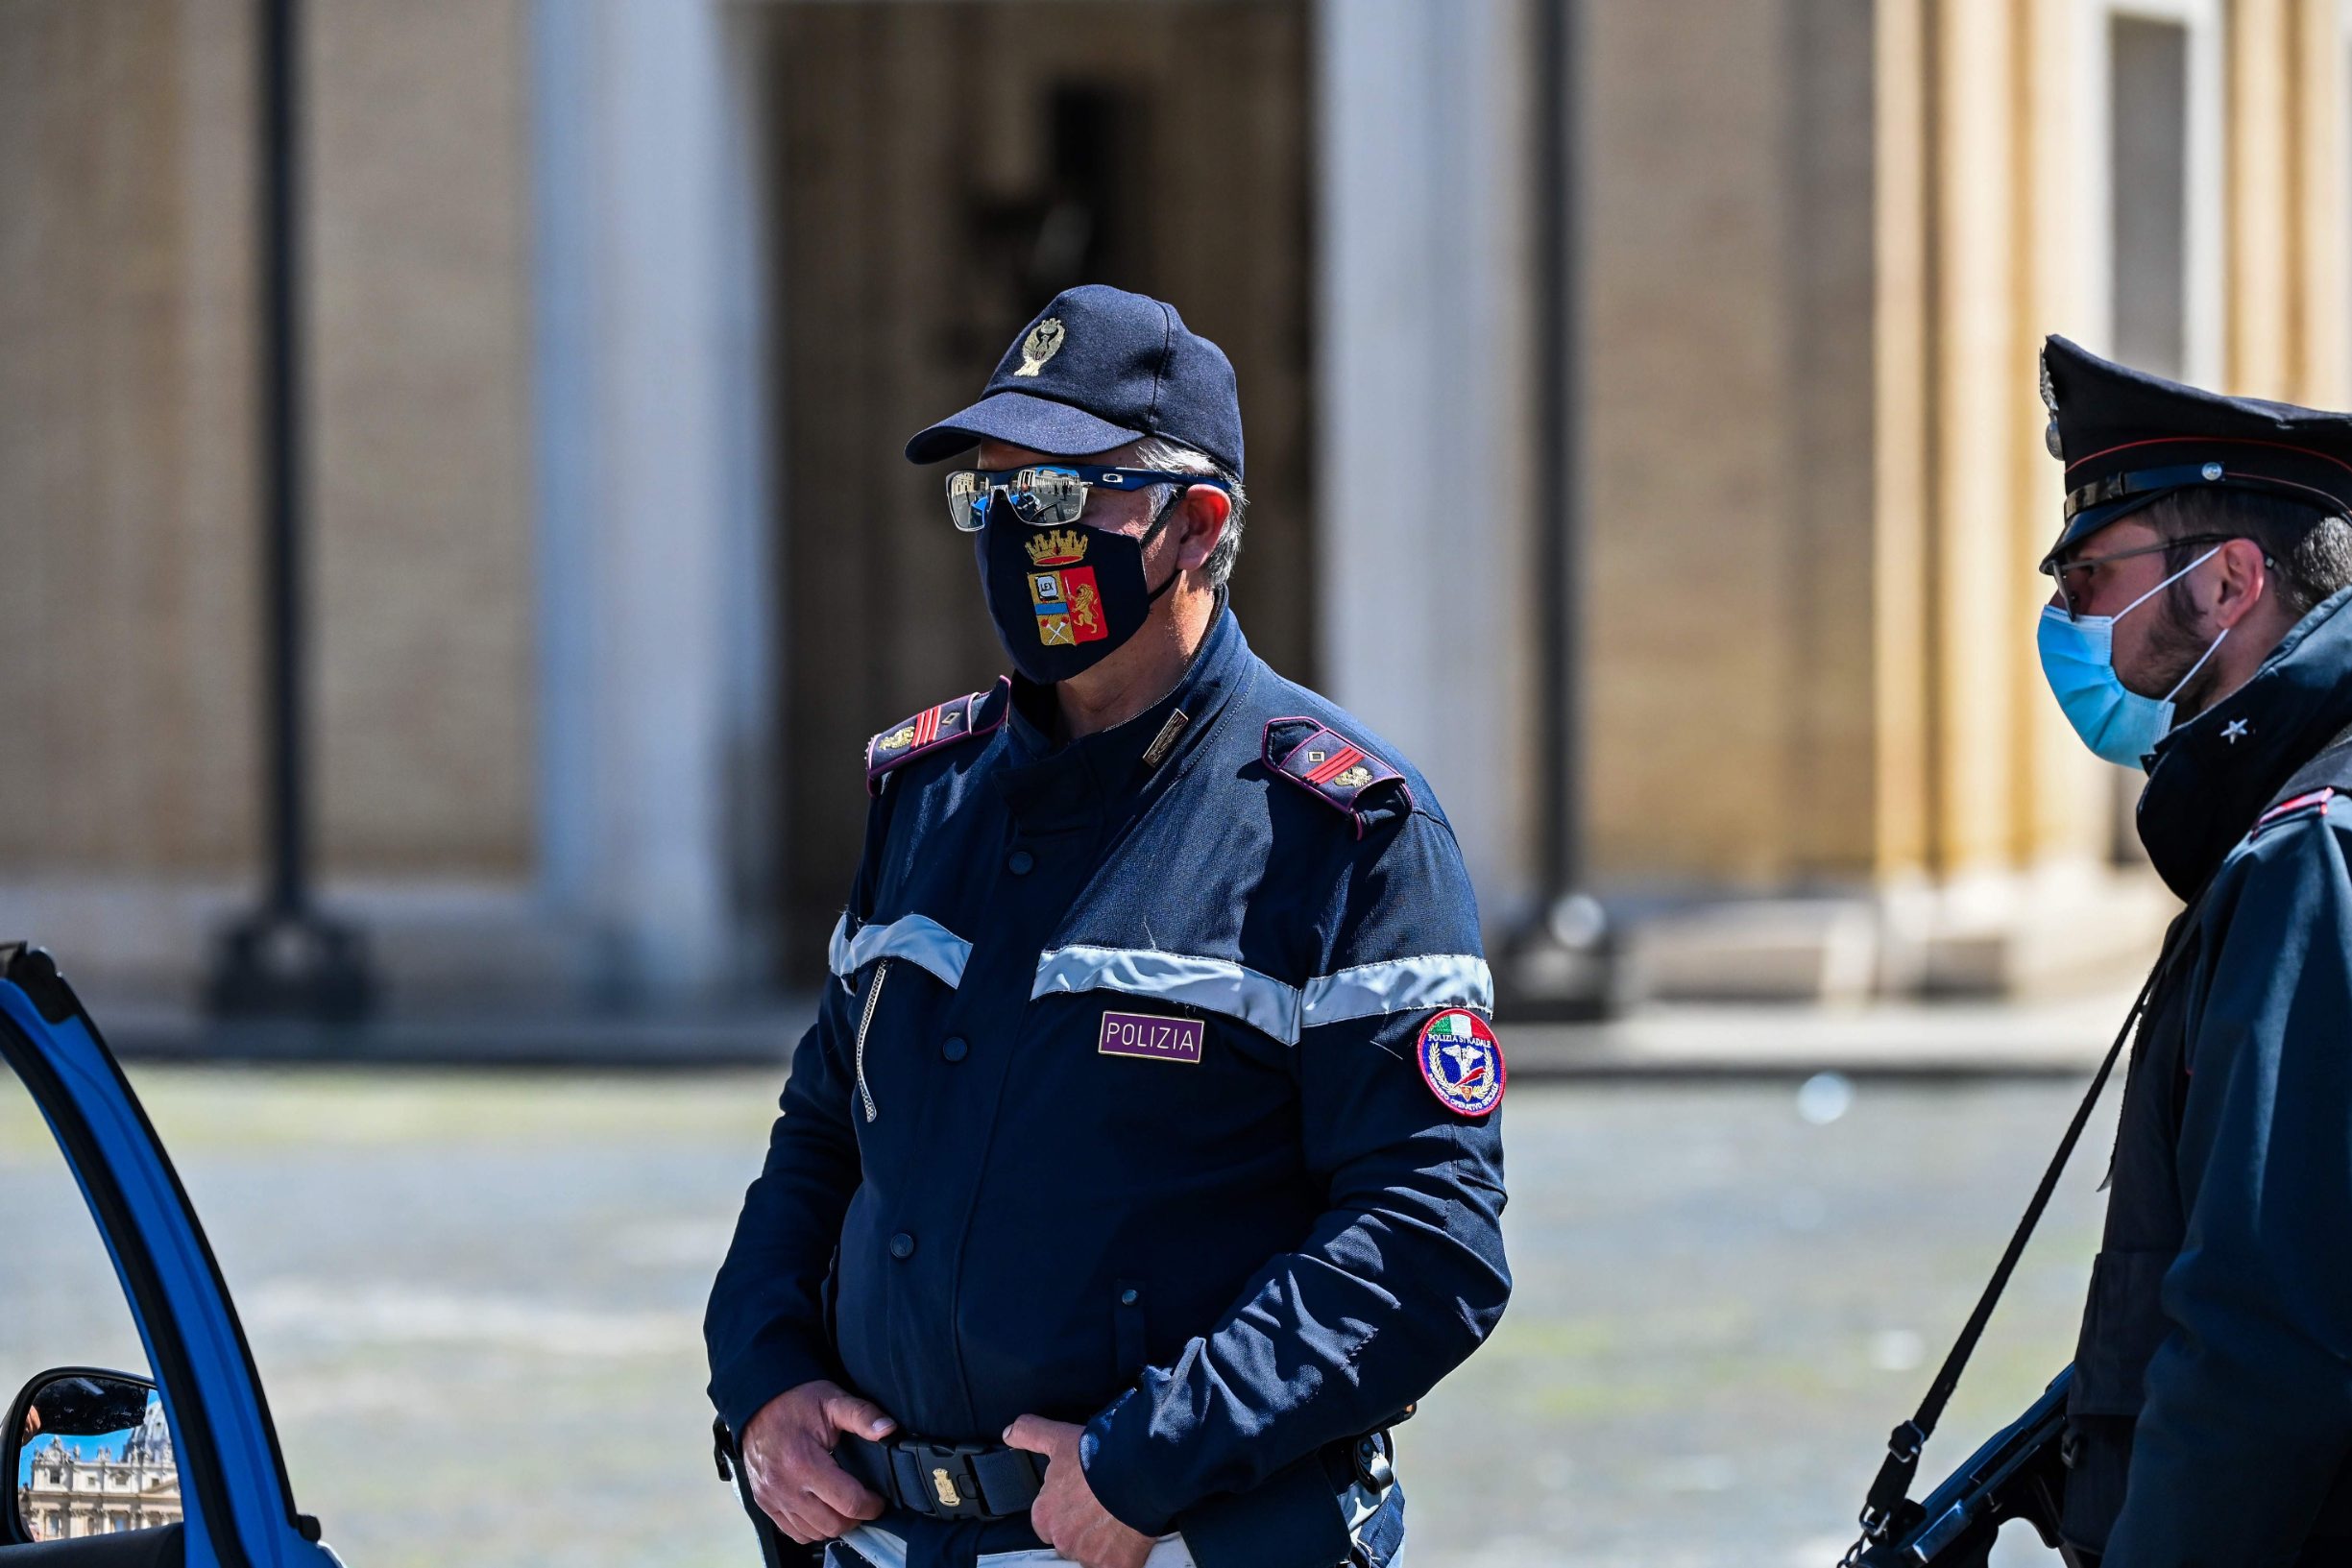 An Italian Policeman wearing a face mask with the Coats of Arms of the Italian State Police (C), and another carrying a firearm patrol at the limit between Rome in Italy and St. Peter's Square in The Vatican on April 26, 2020, during the lockdown aimed at curbing the spread of the COVID-19 infection, caused by the novel coronavirus. (Photo by ANDREAS SOLARO / AFP)